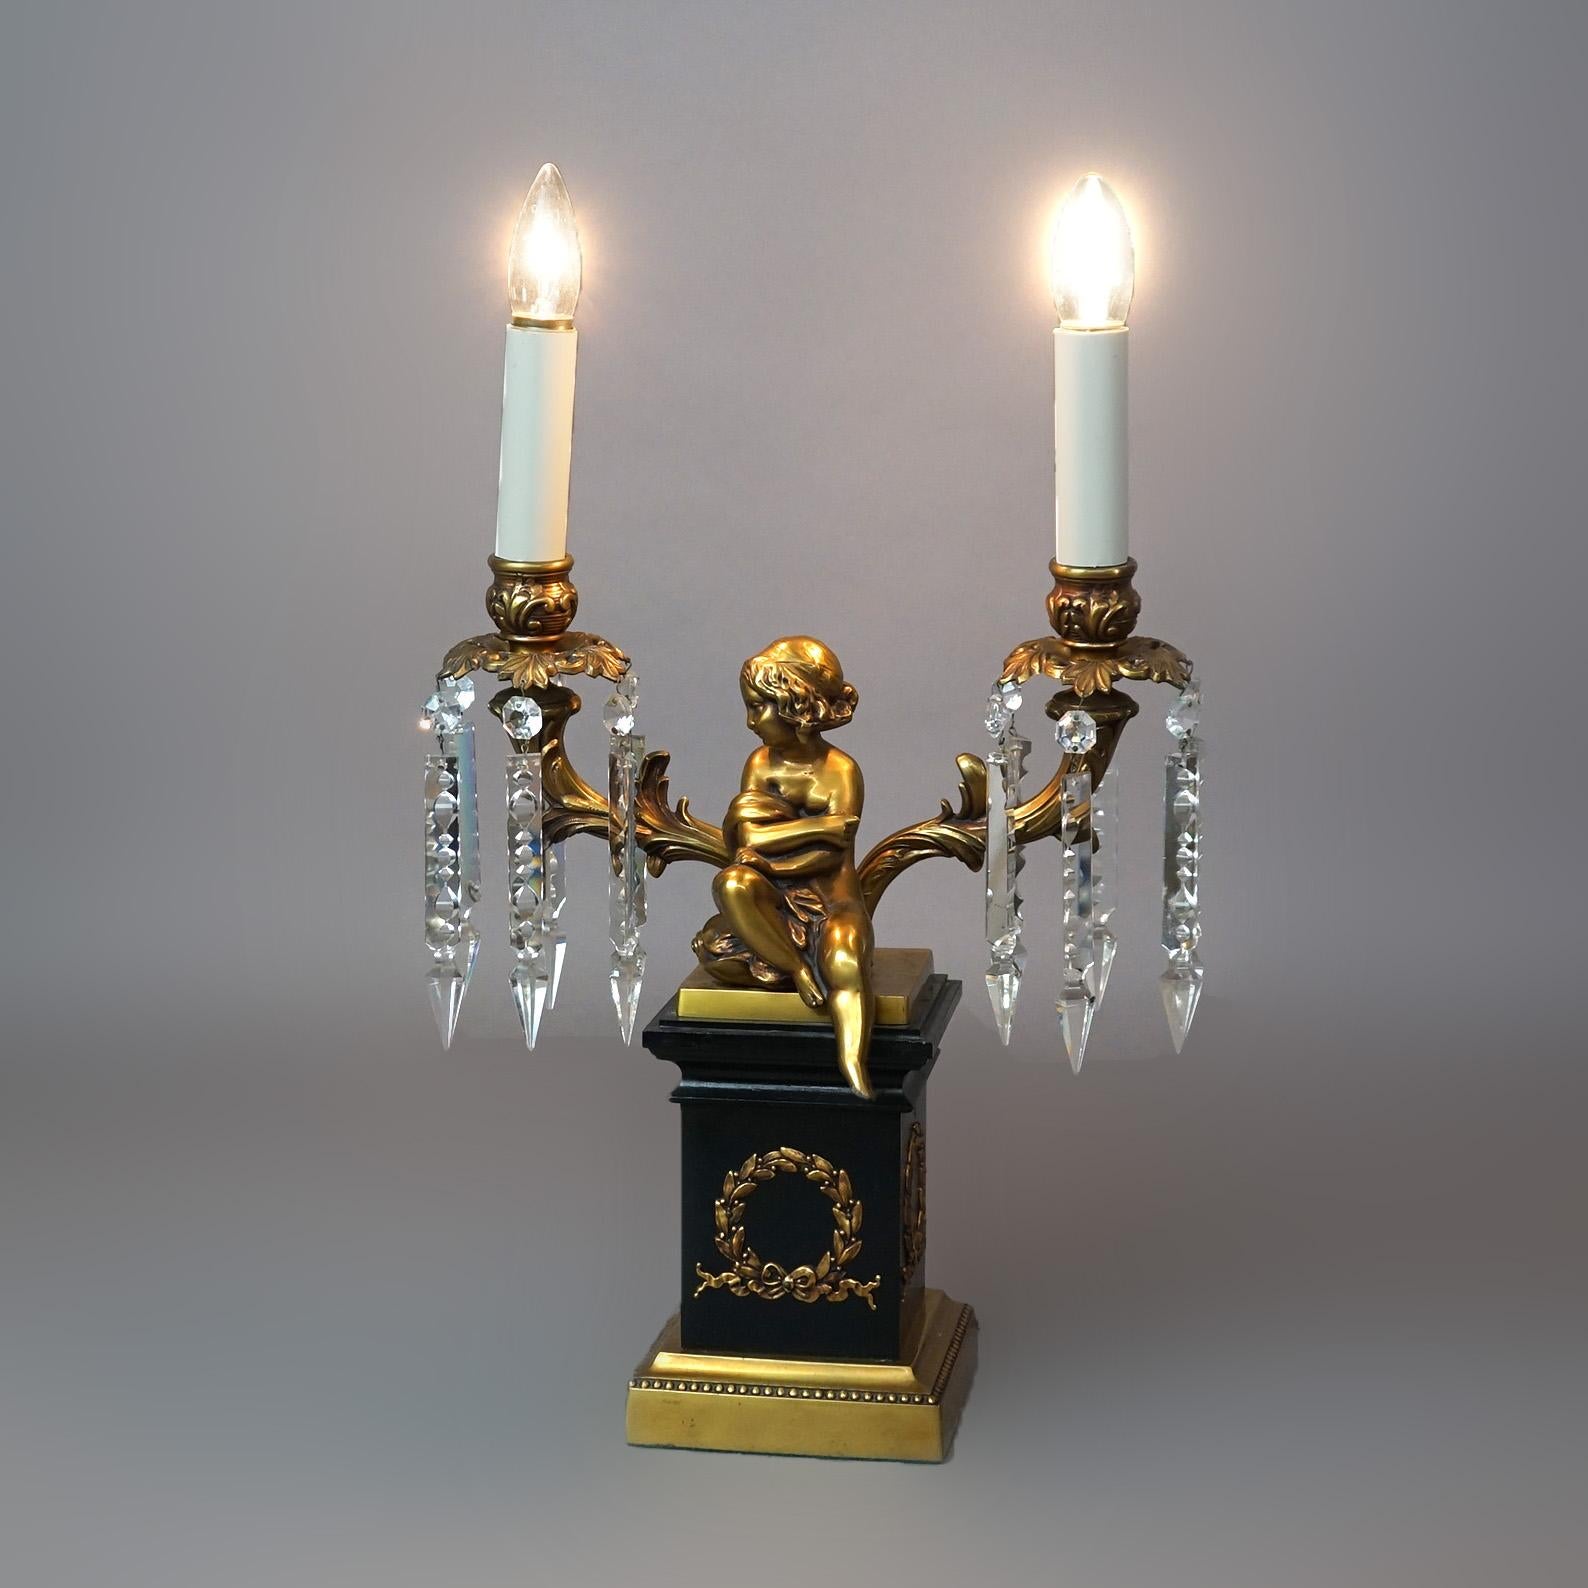 A Neoclassical figural cherub lamp offers brass and ebonized metal construction with two arms terminating in candle lights, 20th century

Measures - 22.5